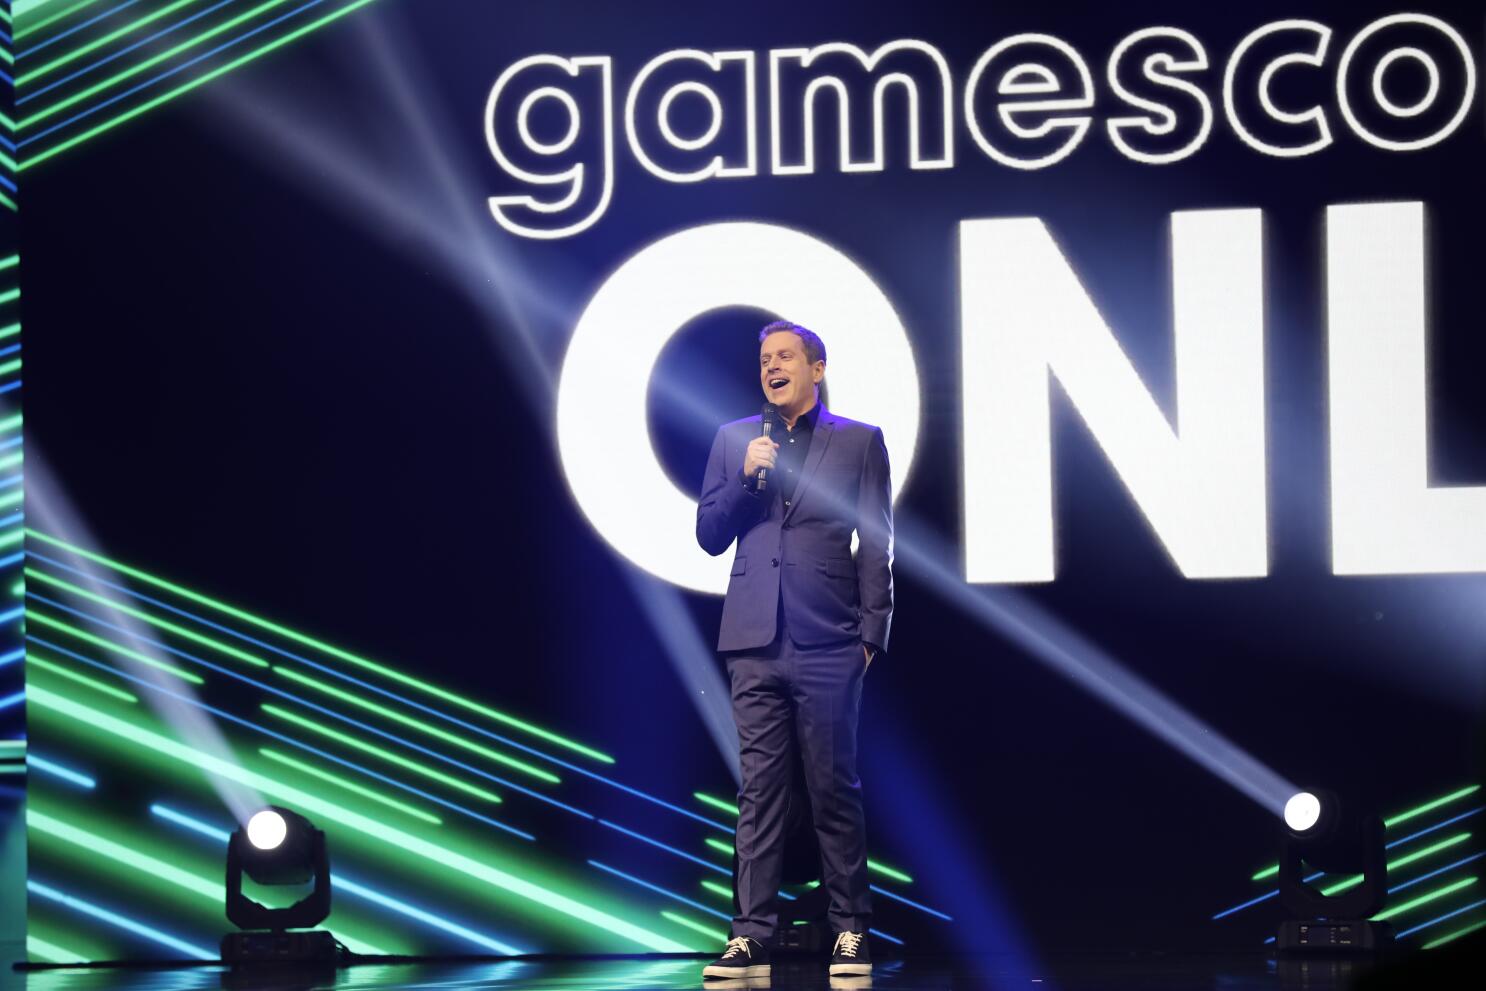 The Bizarre Reason Bill Clinton Was 'Nominated' At The Game Awards